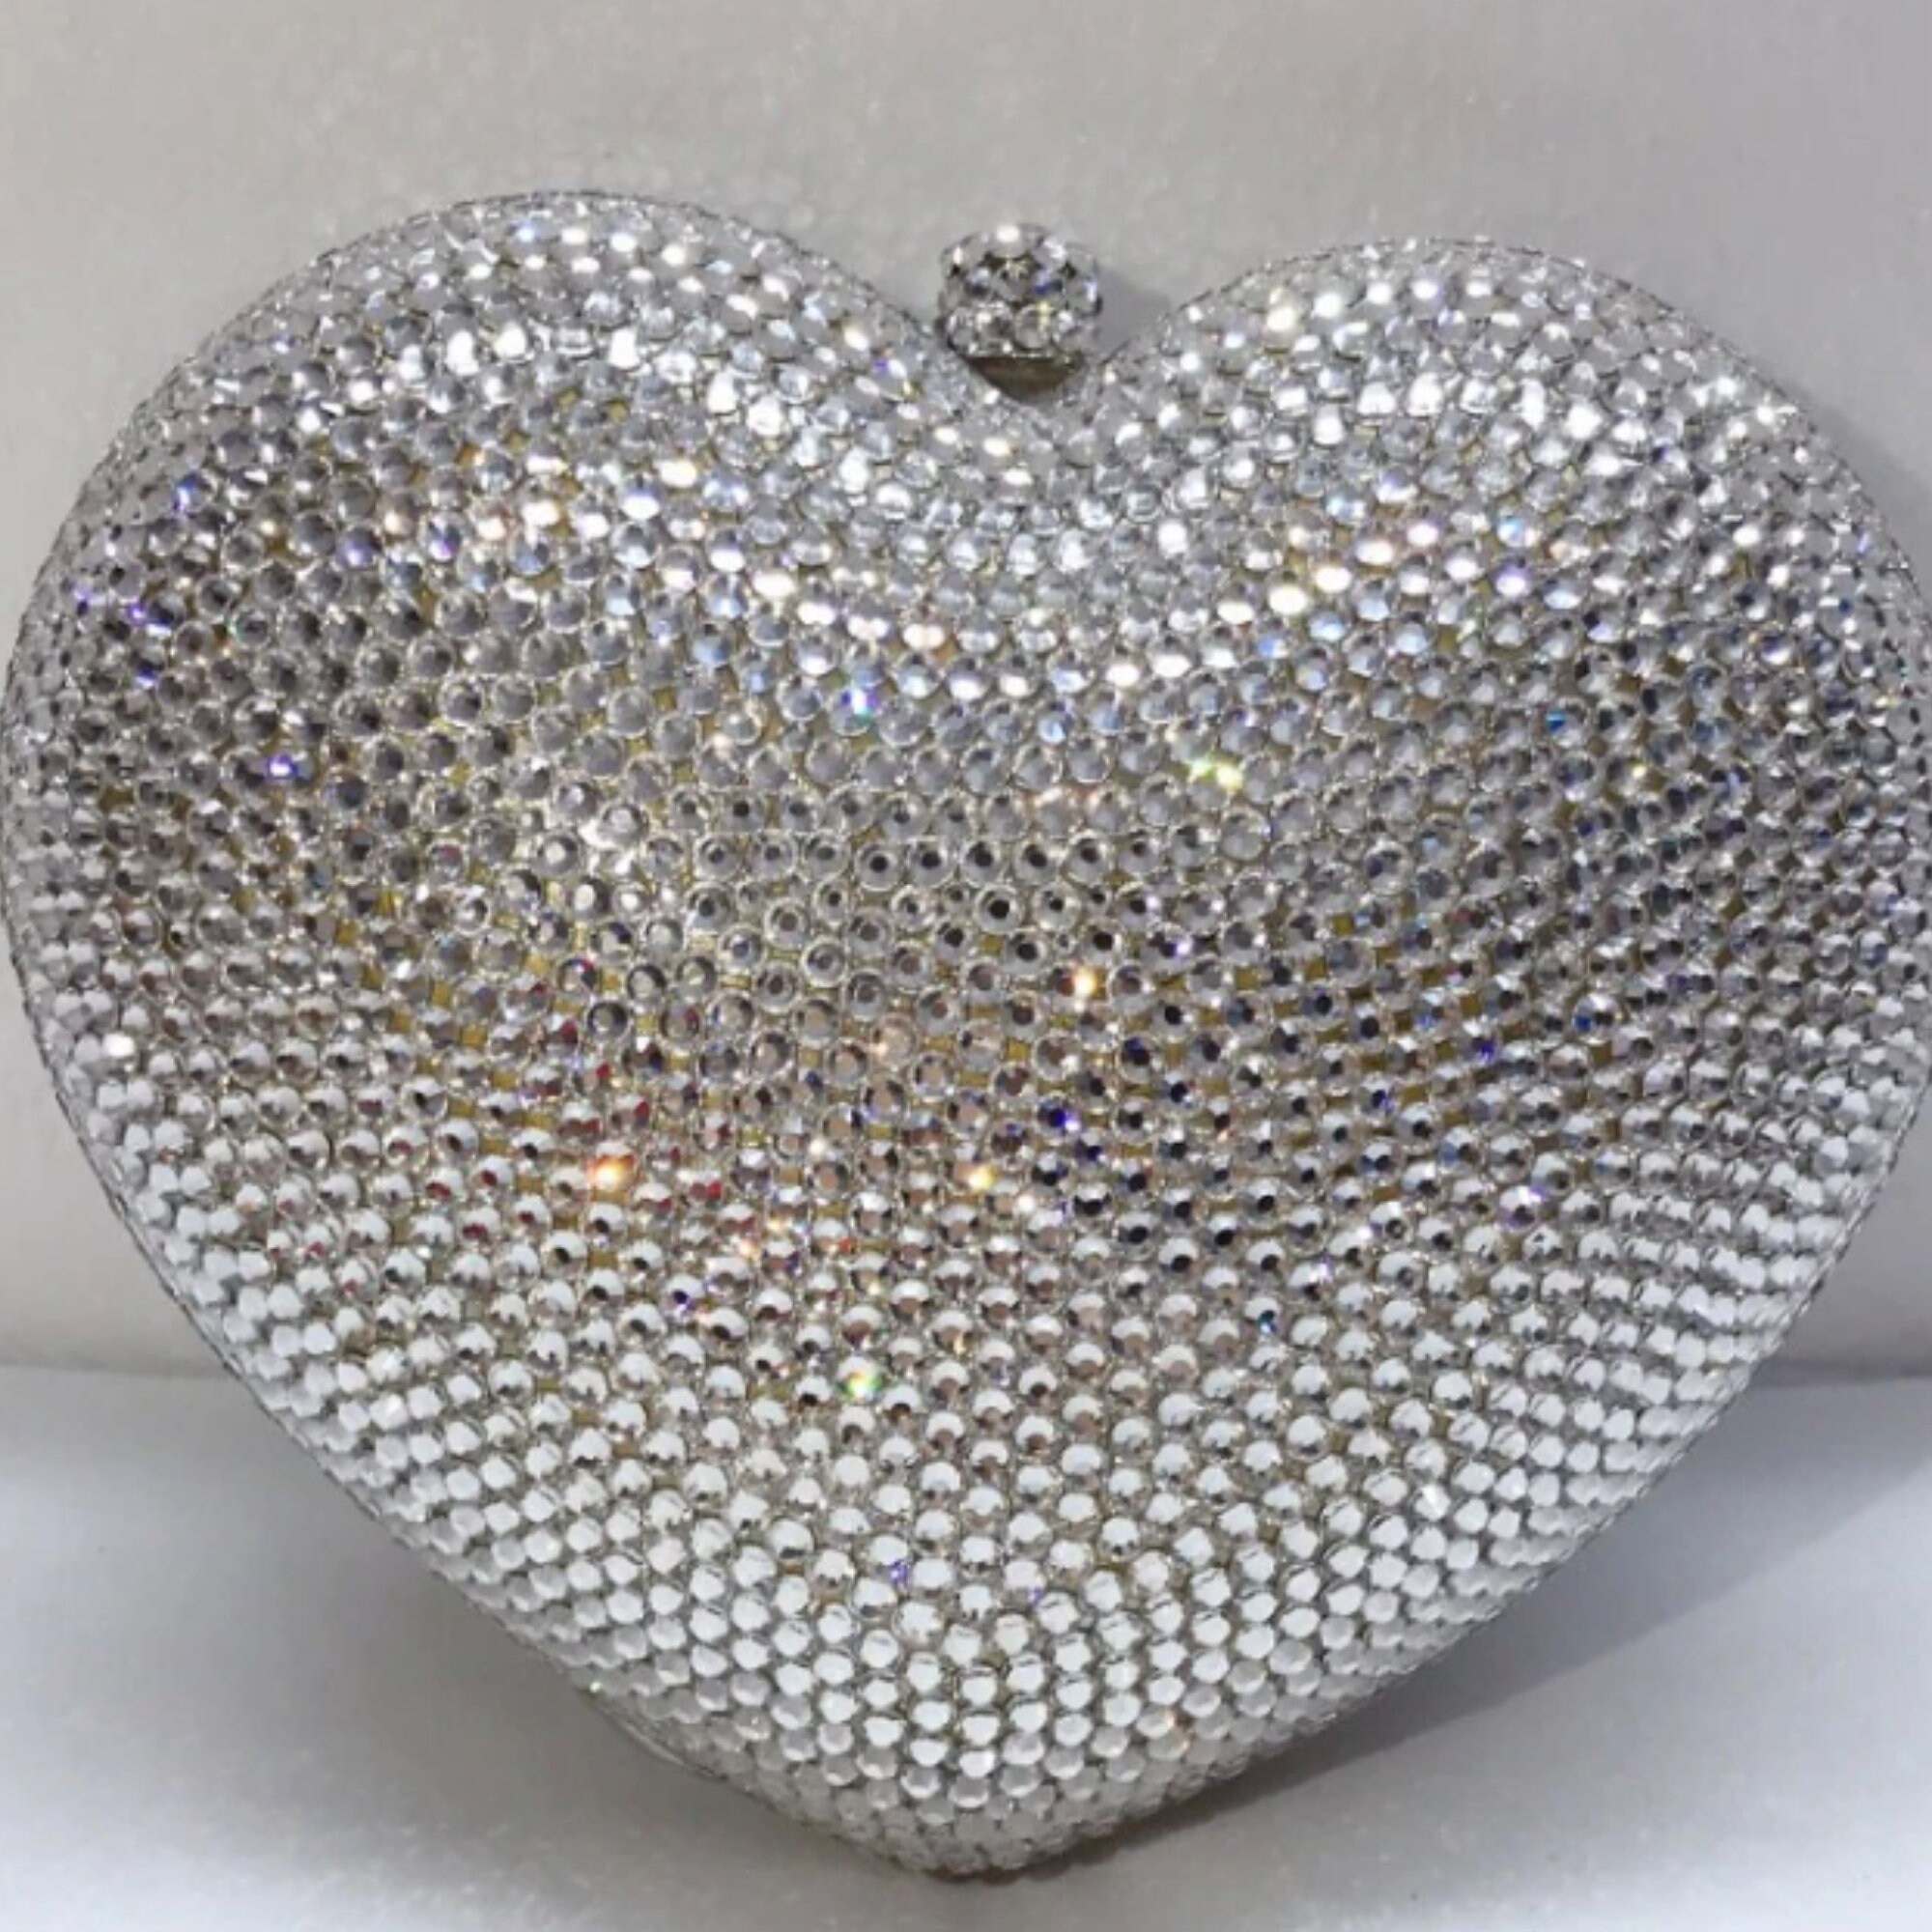 Plush Heart Shaped Clutch Bag – AfterAmour